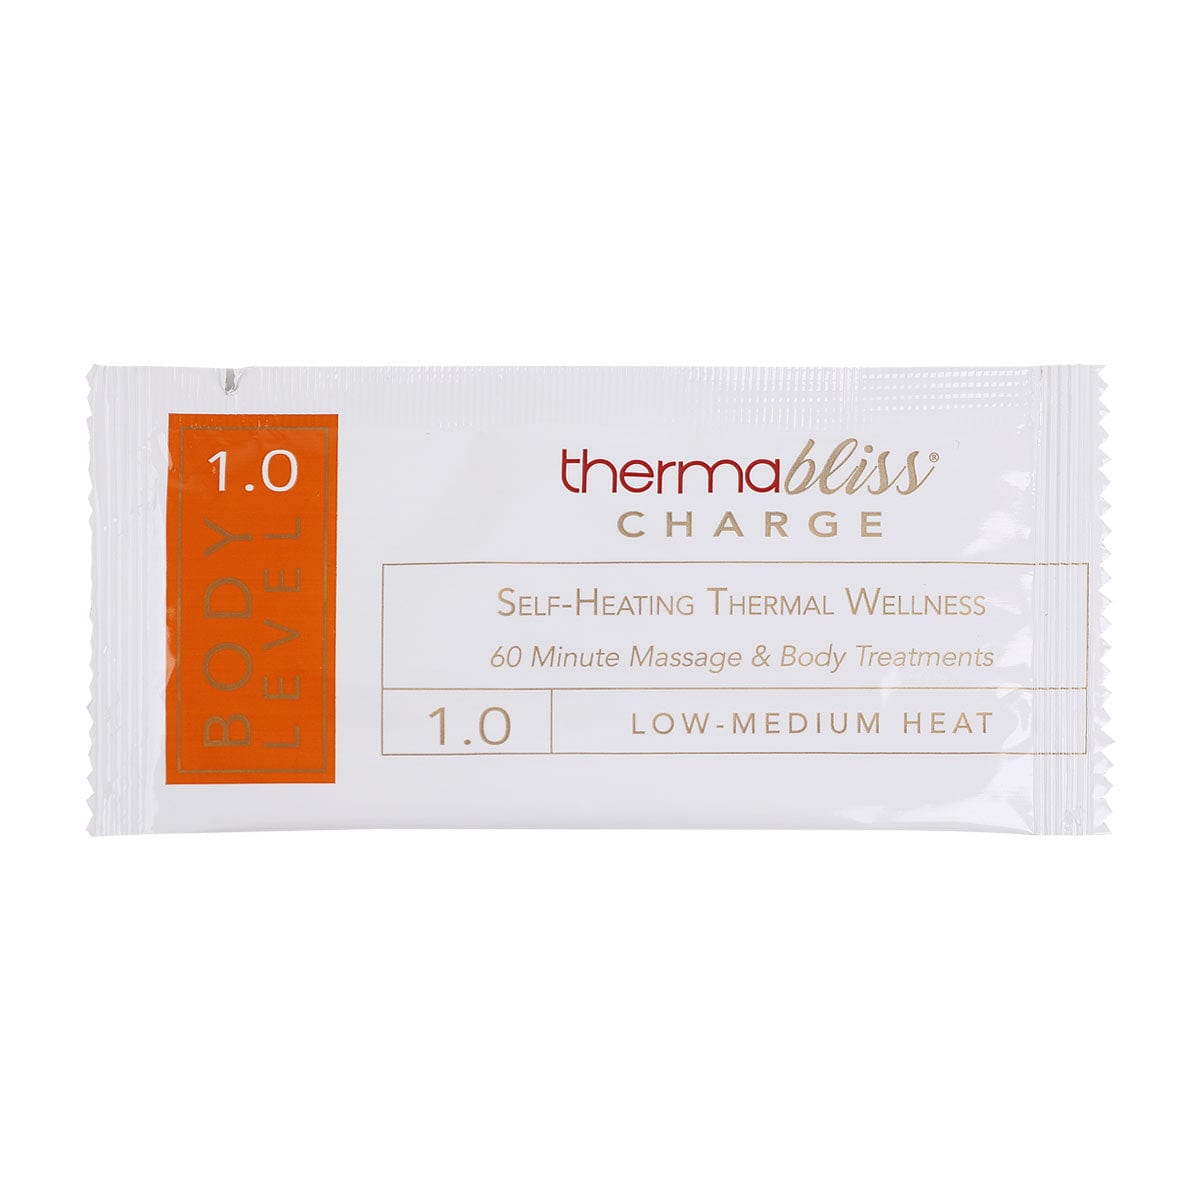 ThermaBliss Charge Body Level 1.0 Low-Meduim Heat (36 treatments)